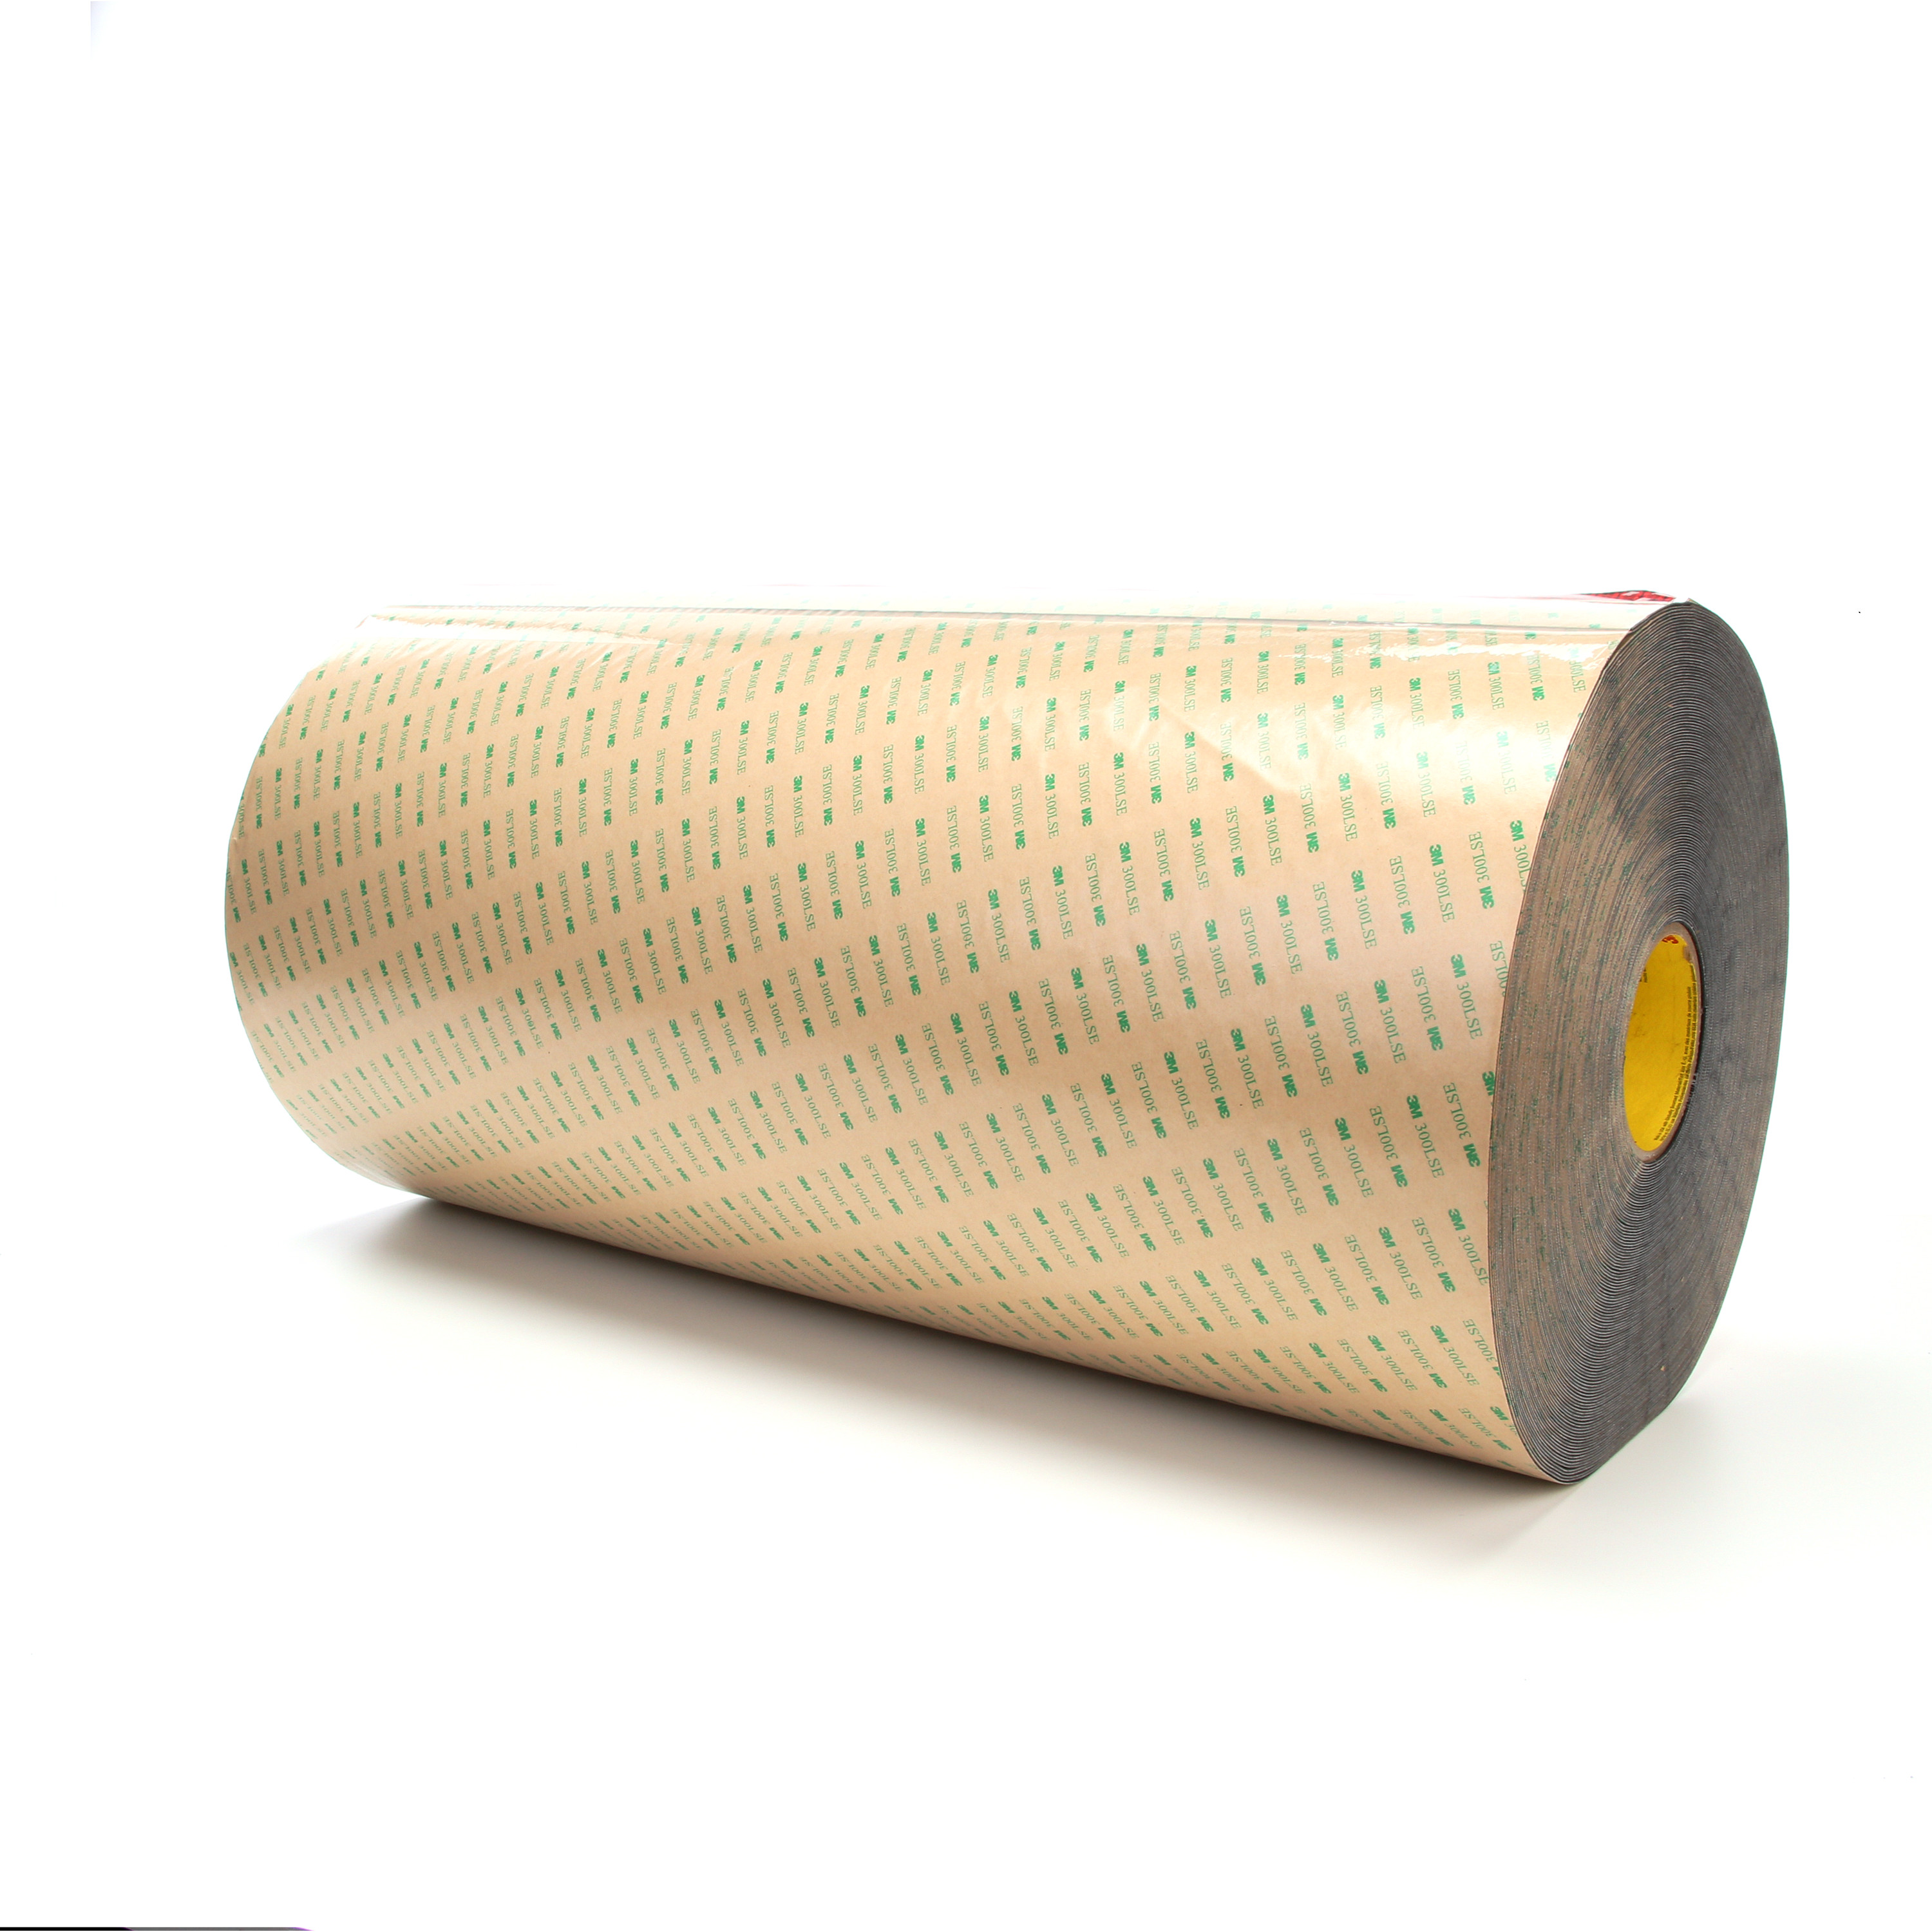 3M™ Gripping Material GM631, Gray, 24 in x 72 yd, 1 roll per case